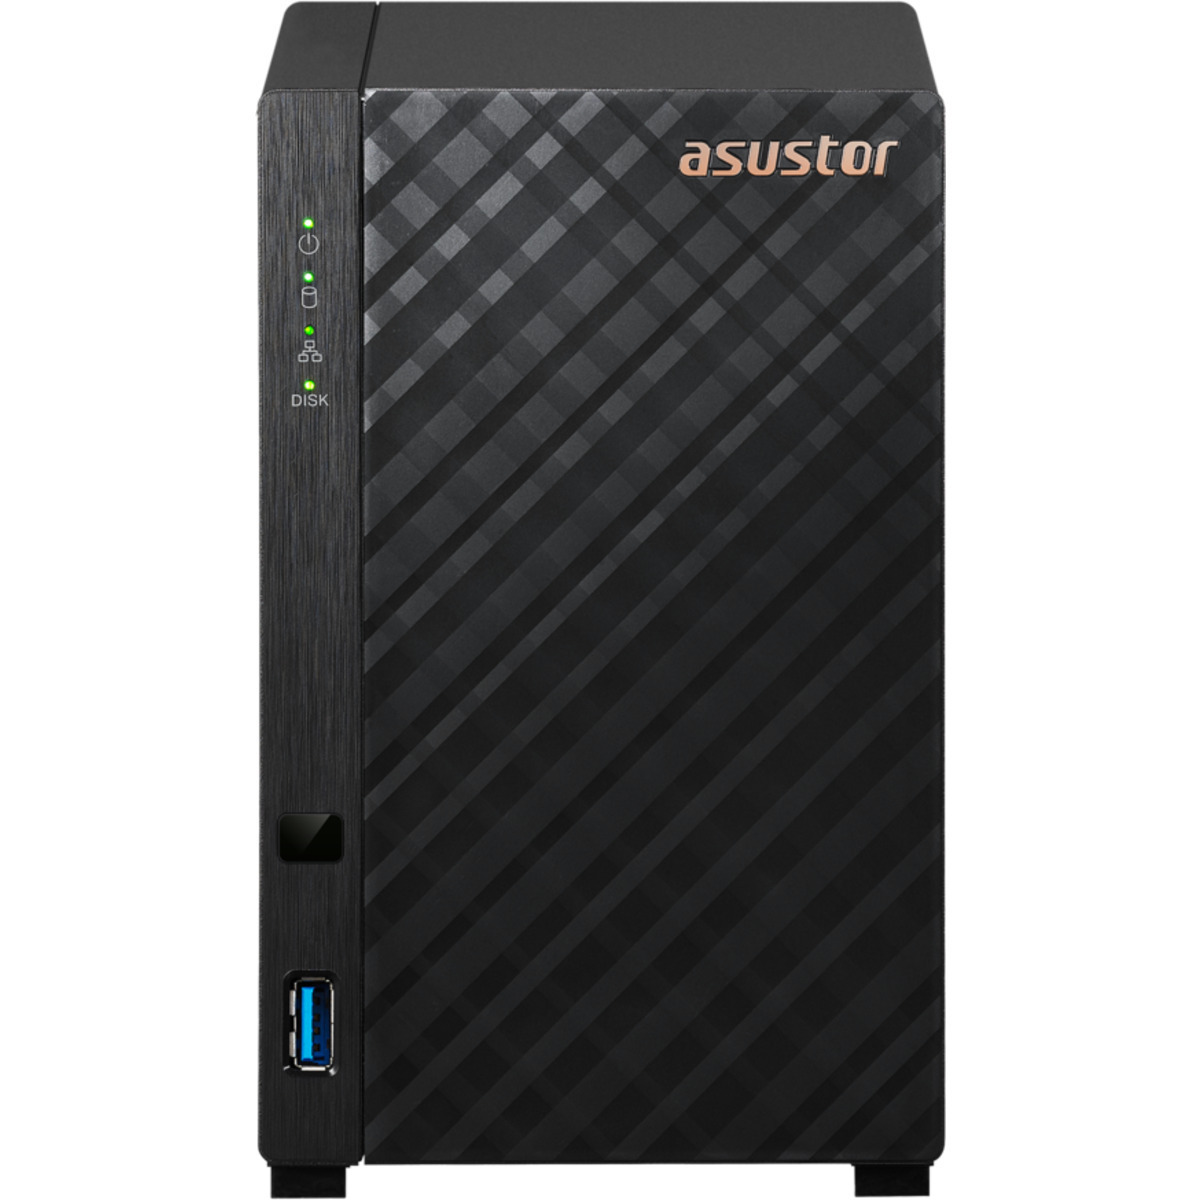 ASUSTOR DRIVESTOR 2 Lite AS1102TL 8tb 2-Bay Desktop Personal / Basic Home / Small Office NAS - Network Attached Storage Device 2x4tb Western Digital Blue WD40EZRZ 3.5 5400rpm SATA 6Gb/s HDD CONSUMER Class Drives Installed - Burn-In Tested - ON SALE DRIVESTOR 2 Lite AS1102TL